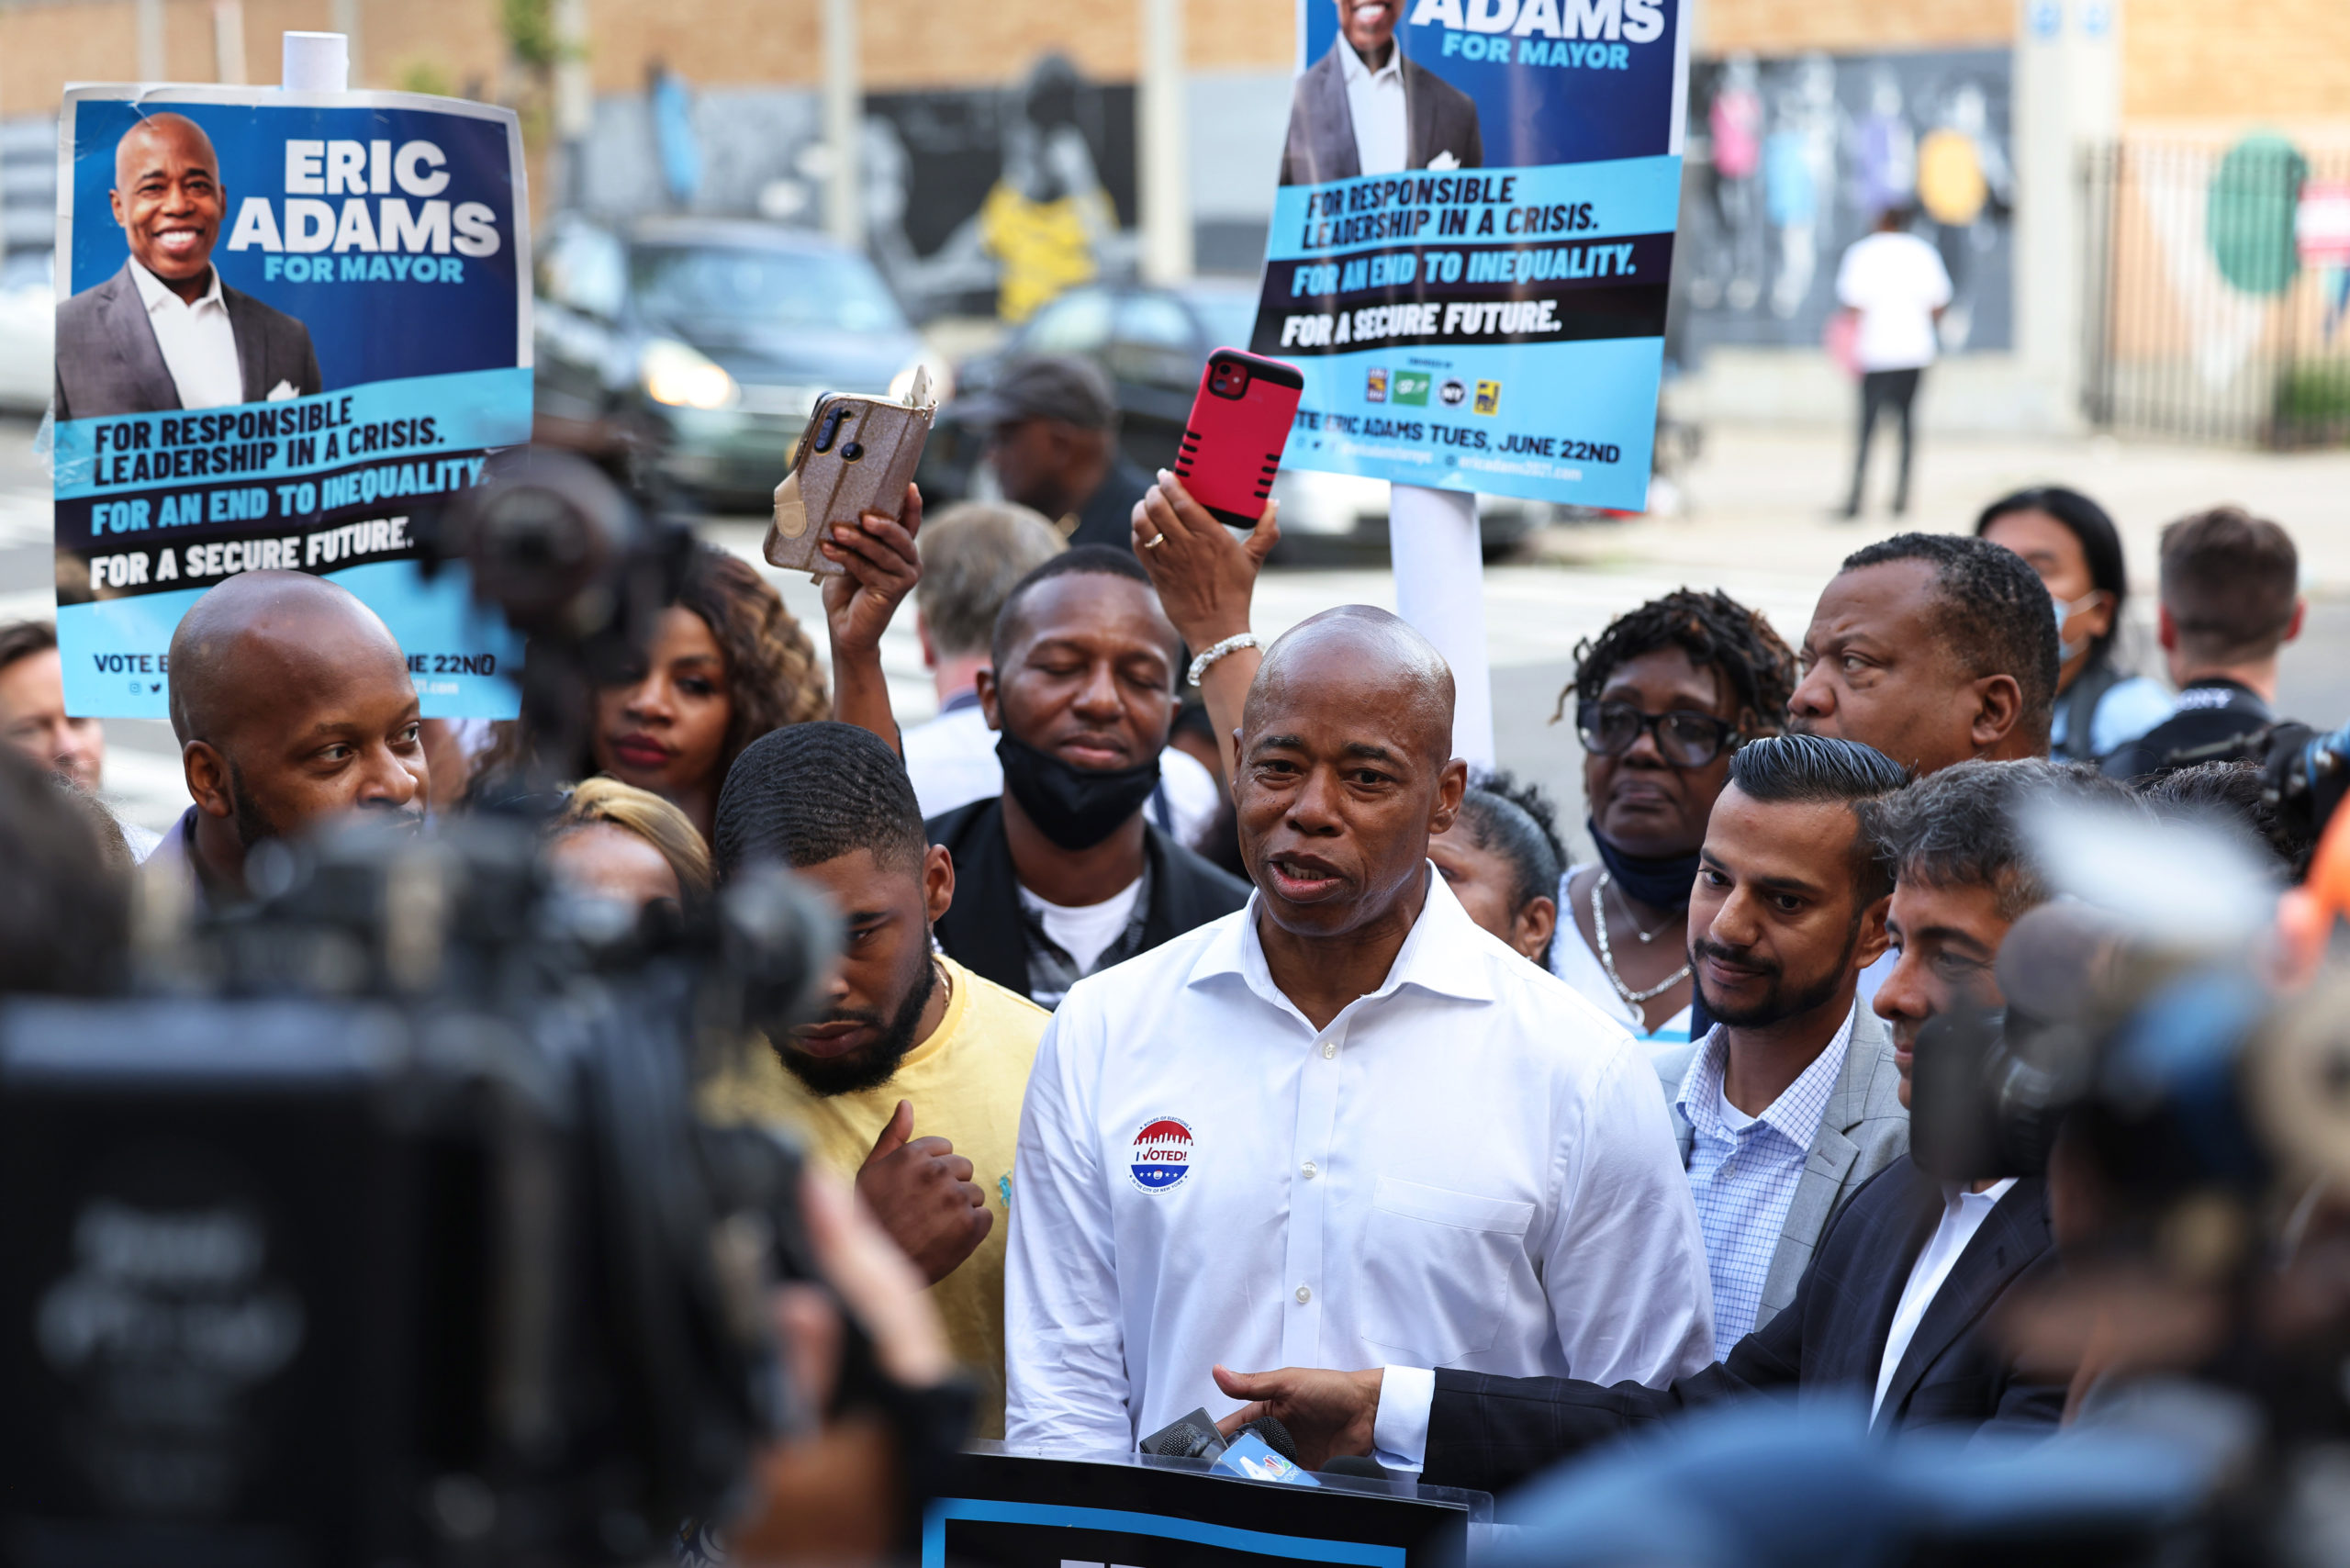 Eric Adams speaks after voting during on Tuesday in Brooklyn, New York. (Michael M. Santiago/Getty Images)